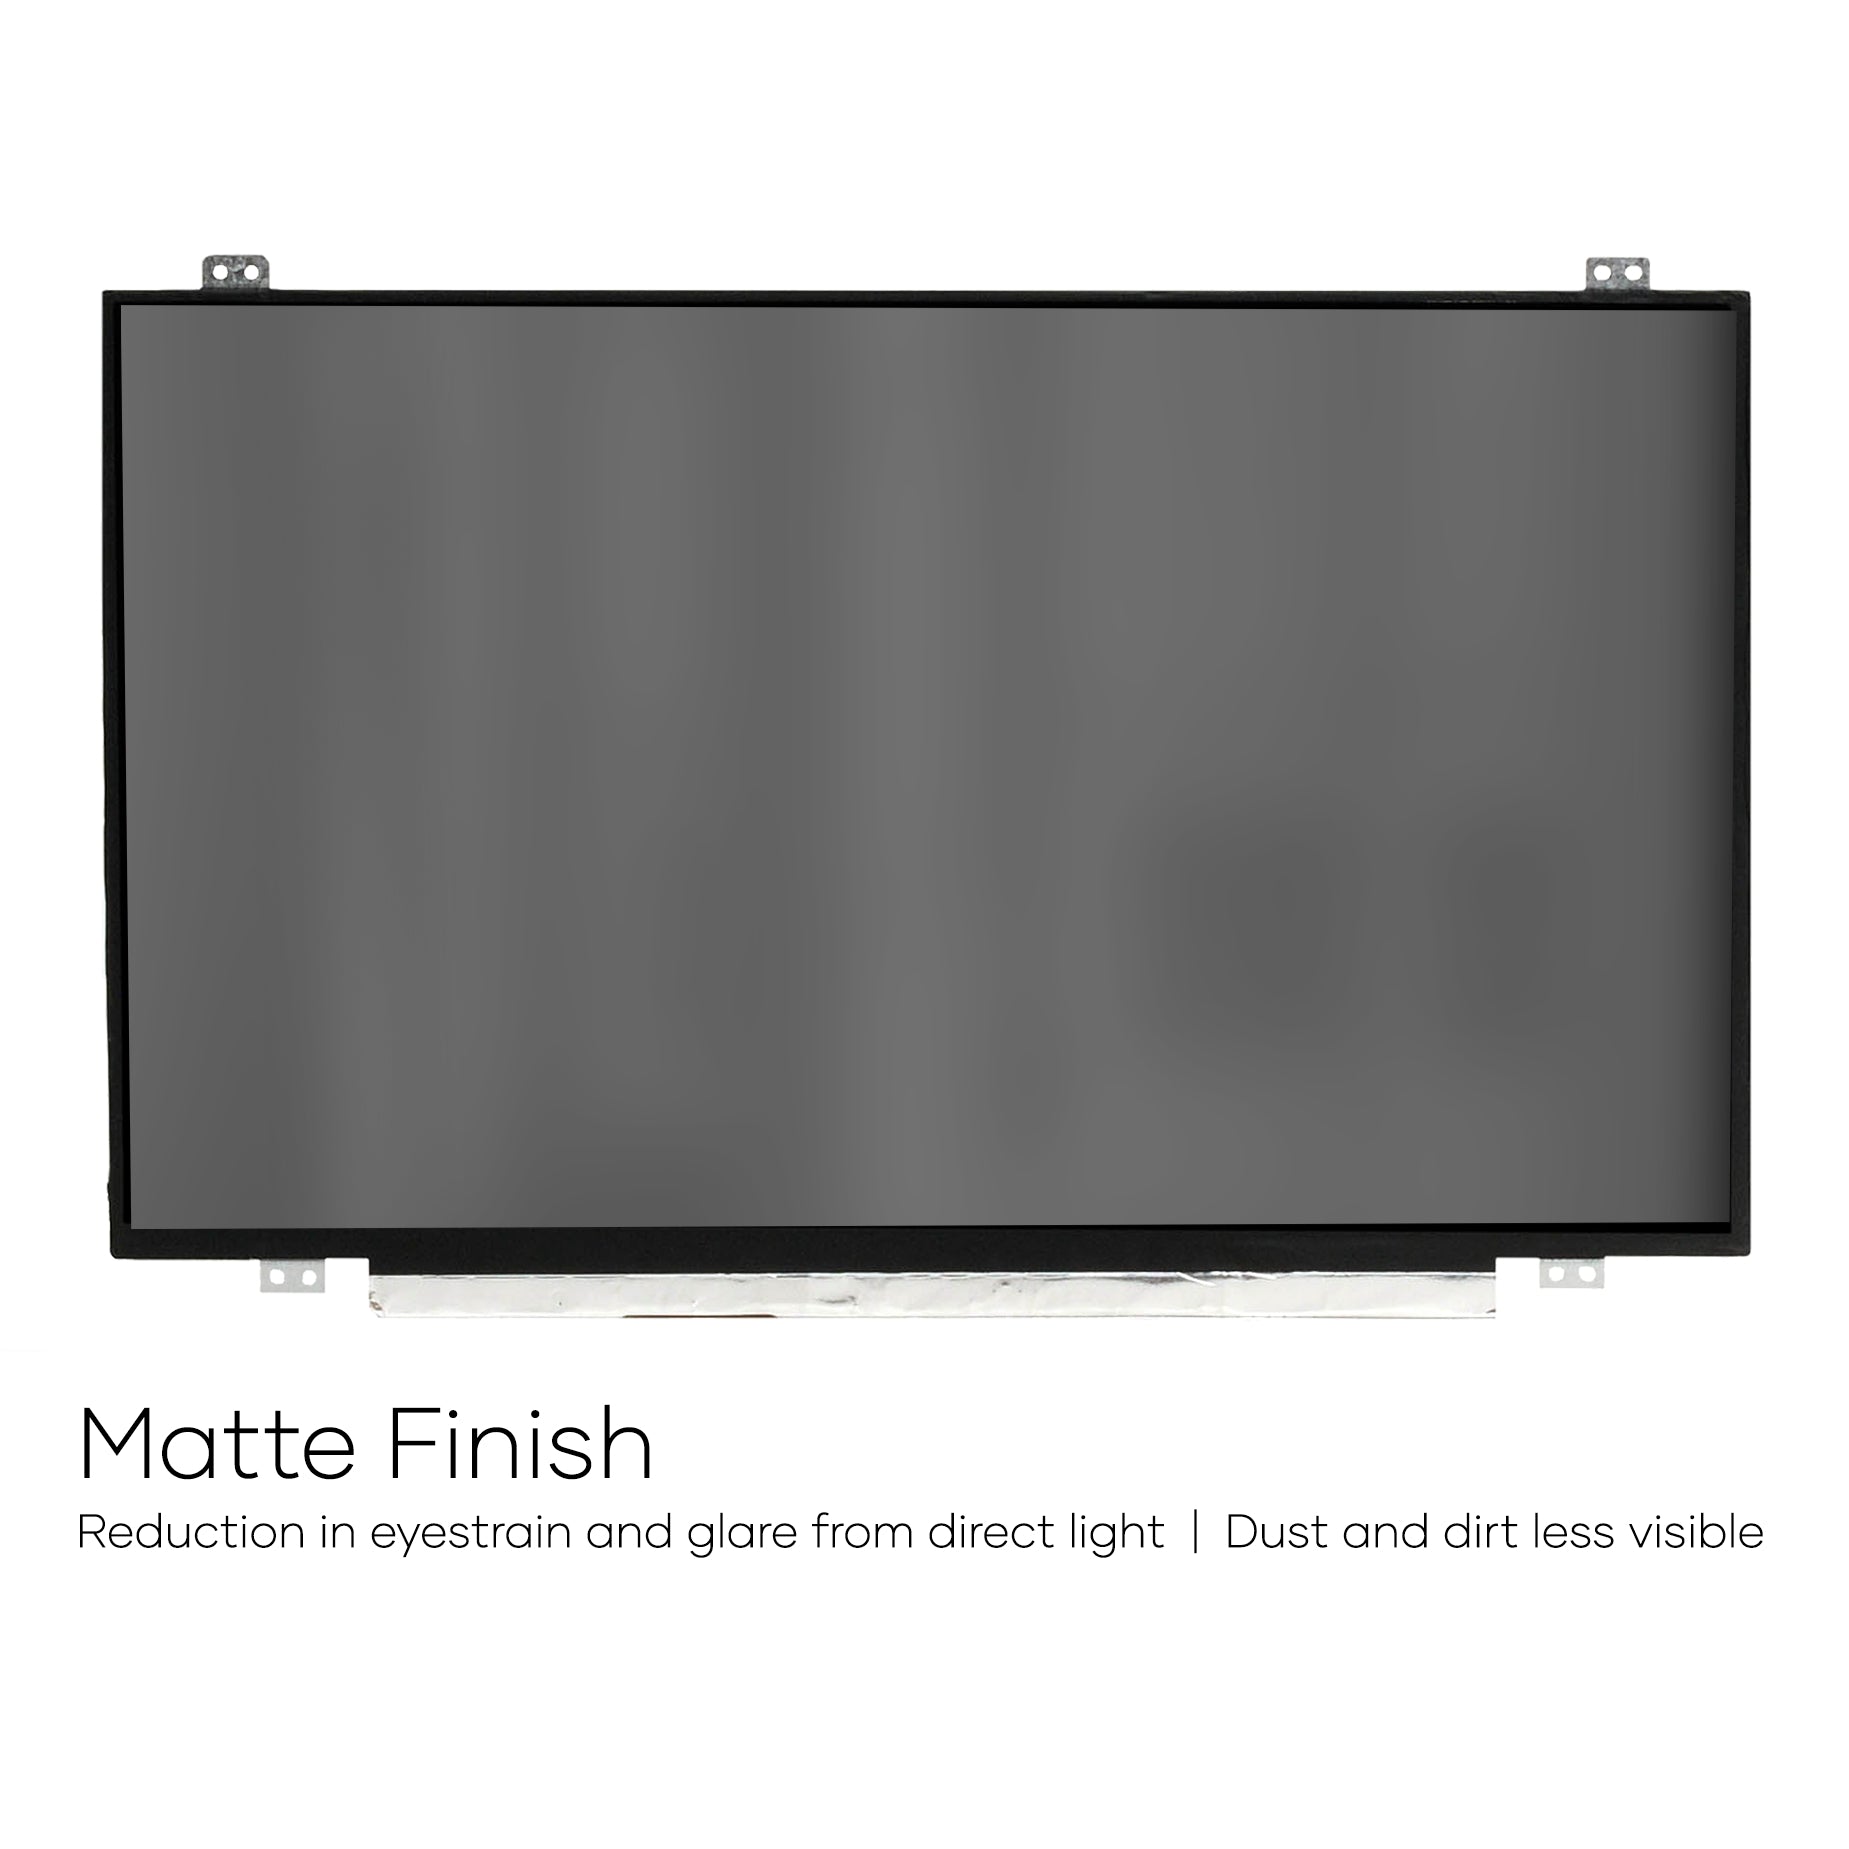 Screen Replacement for Dell P/N V8HK9 D/PN 0V8HK9 FHD 1920x1080 IPS Matte LCD LED Display